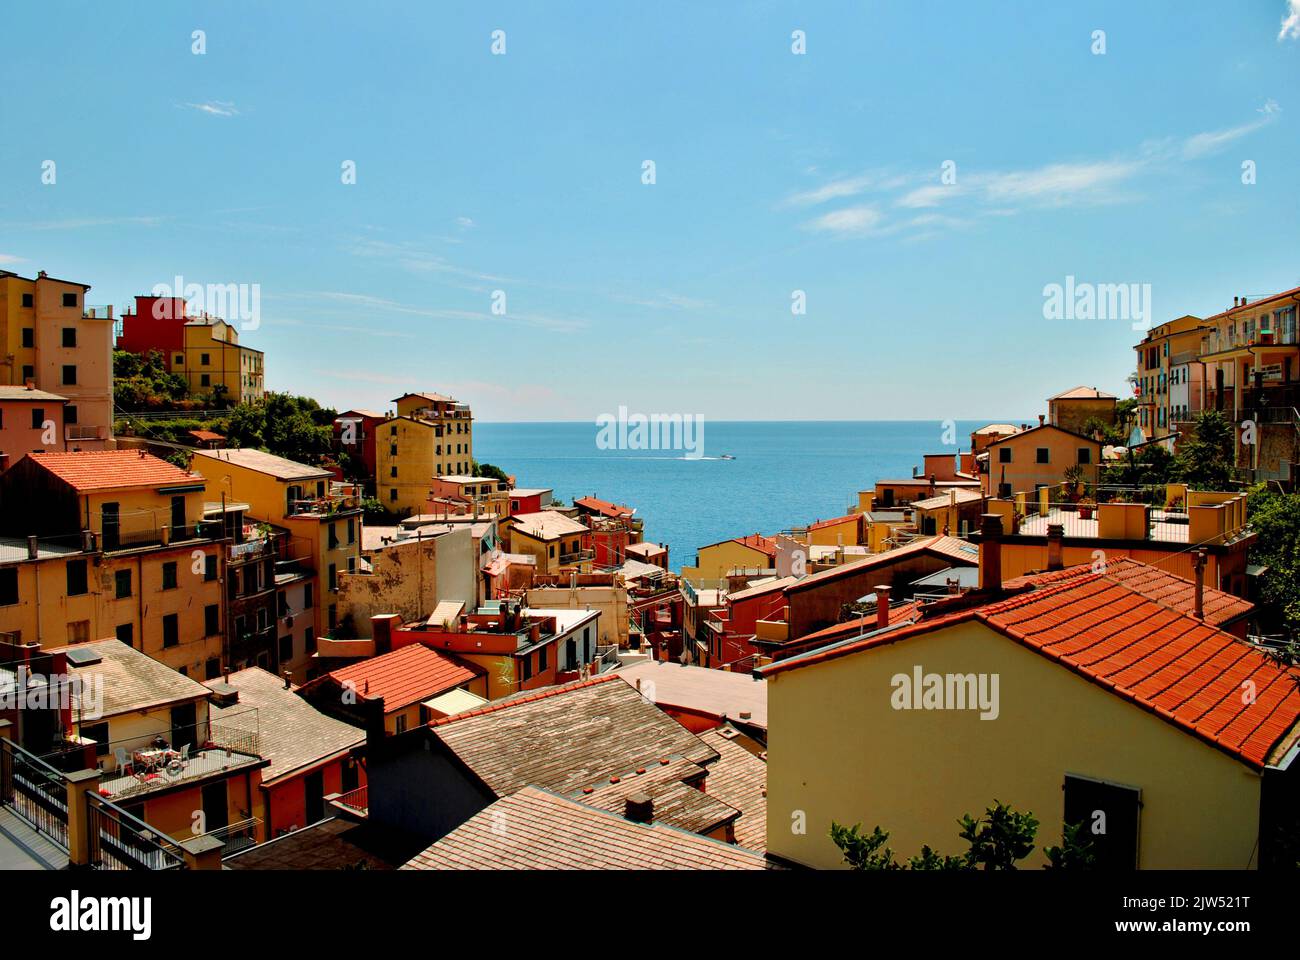 View of rooftops in colorful village by the sea and blue sky Stock Photo